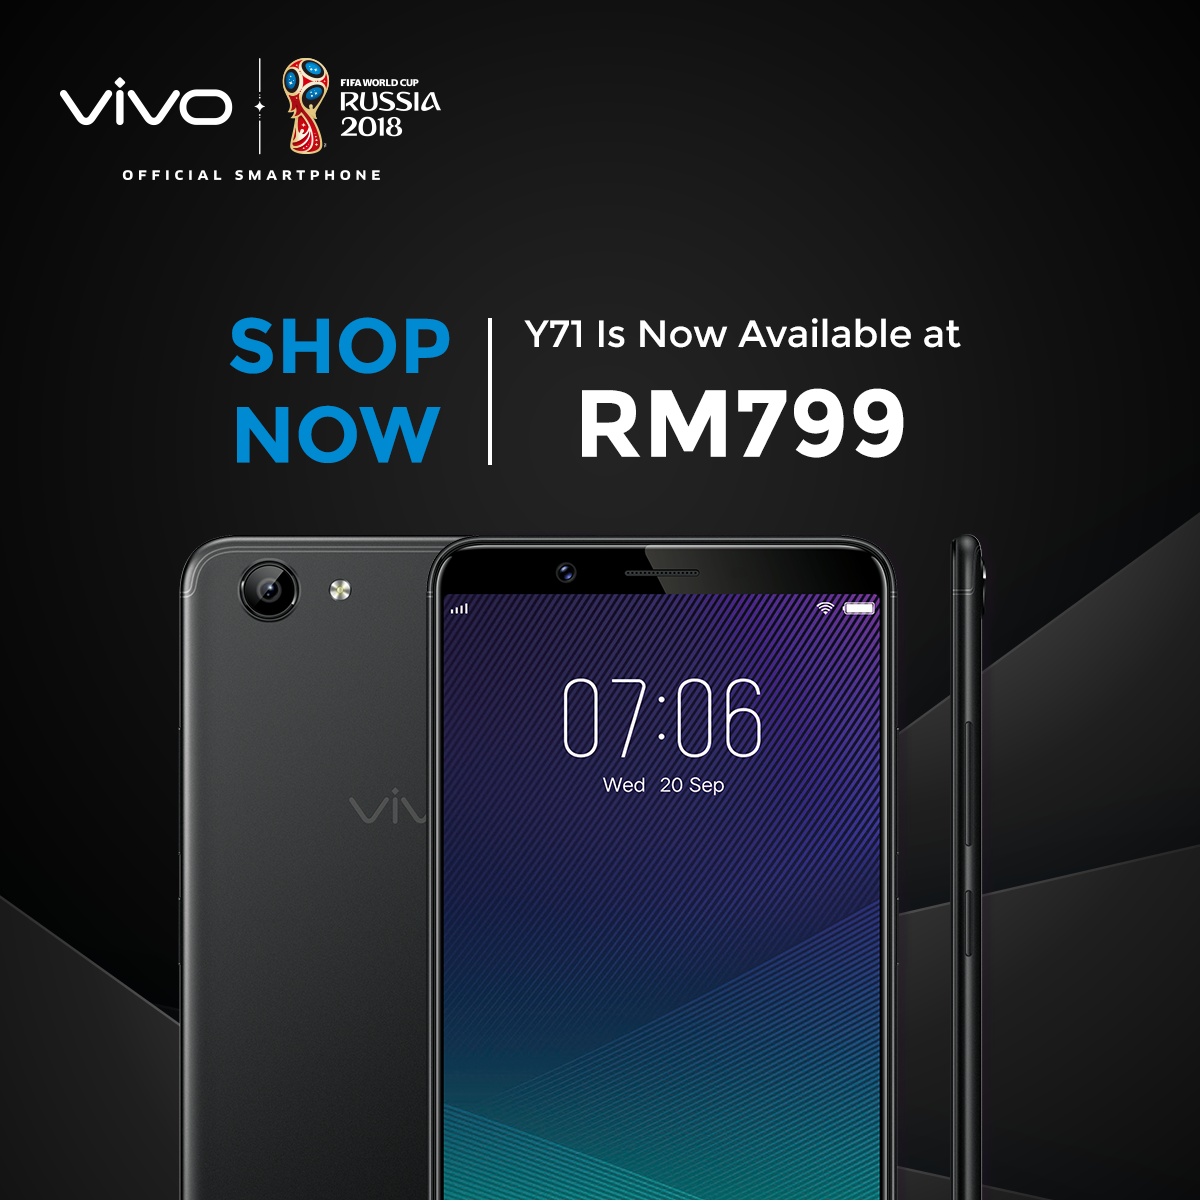 vivo releases Y71 smartphone with 5.99-inch display, 3285mAh battery and more for just RM799